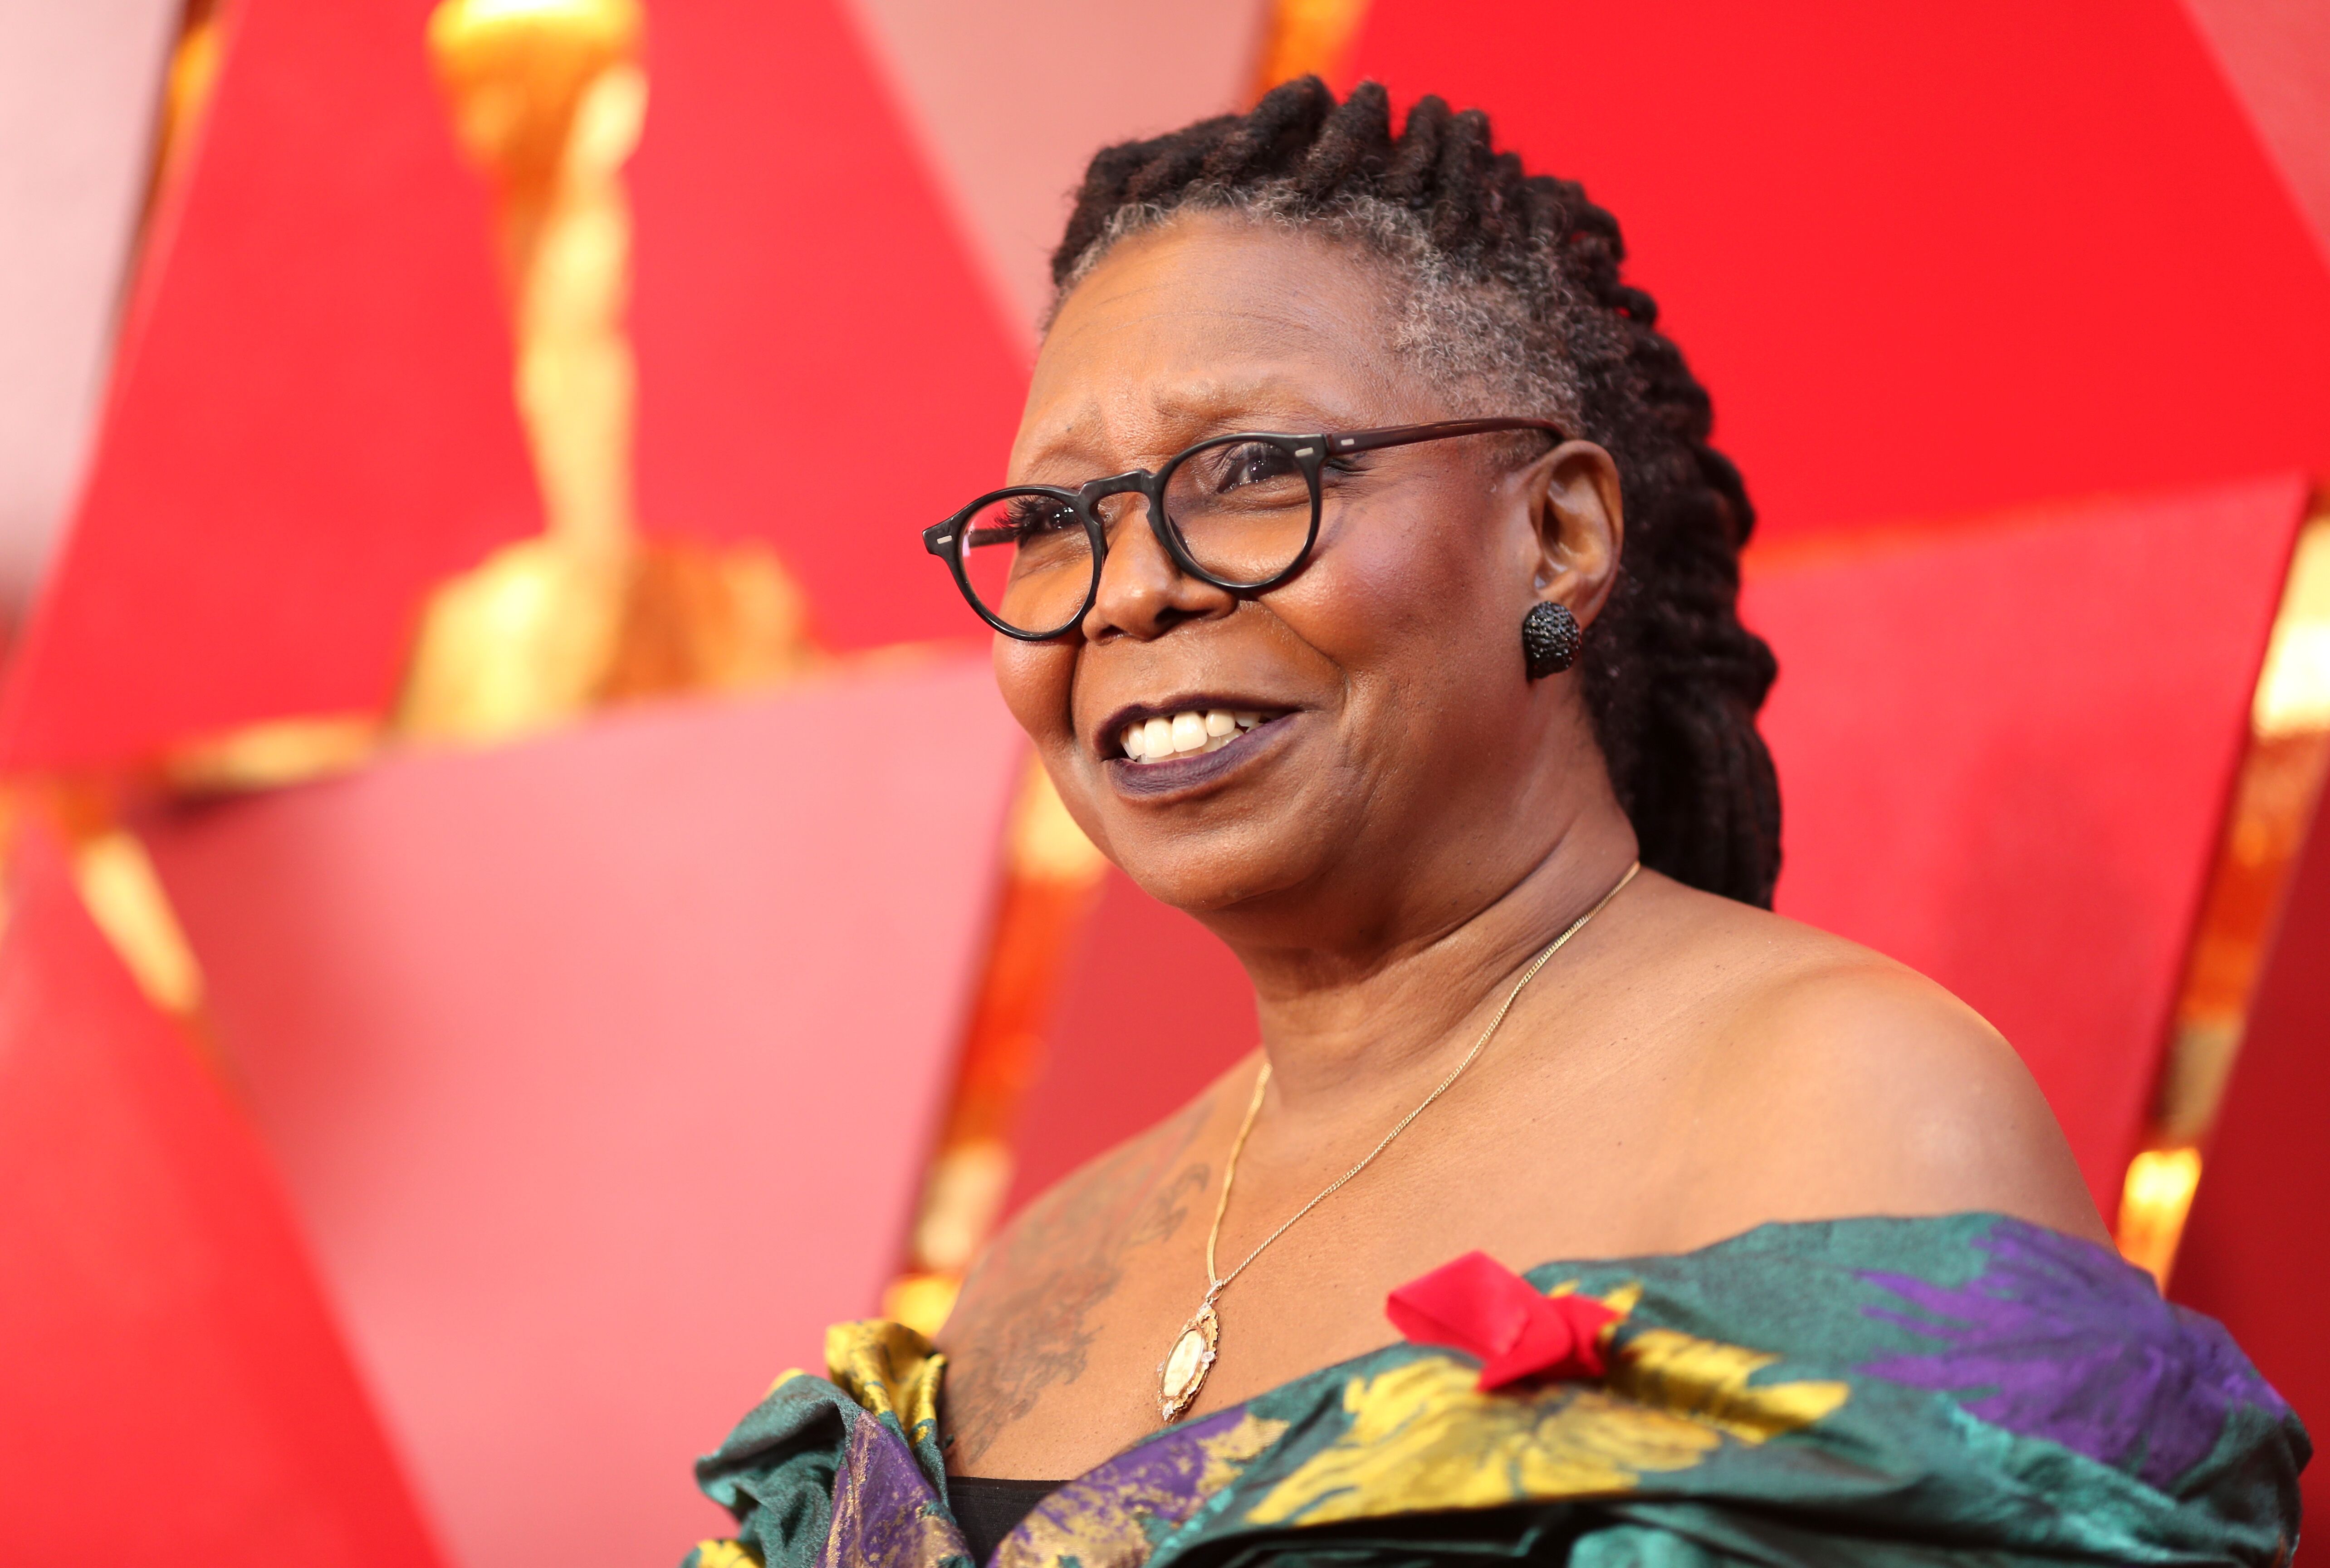 Whoopi Goldberg attends the 90th Annual Academy Awards at Hollywood & Highland Center in Hollywood, California | Photo" Getty Images